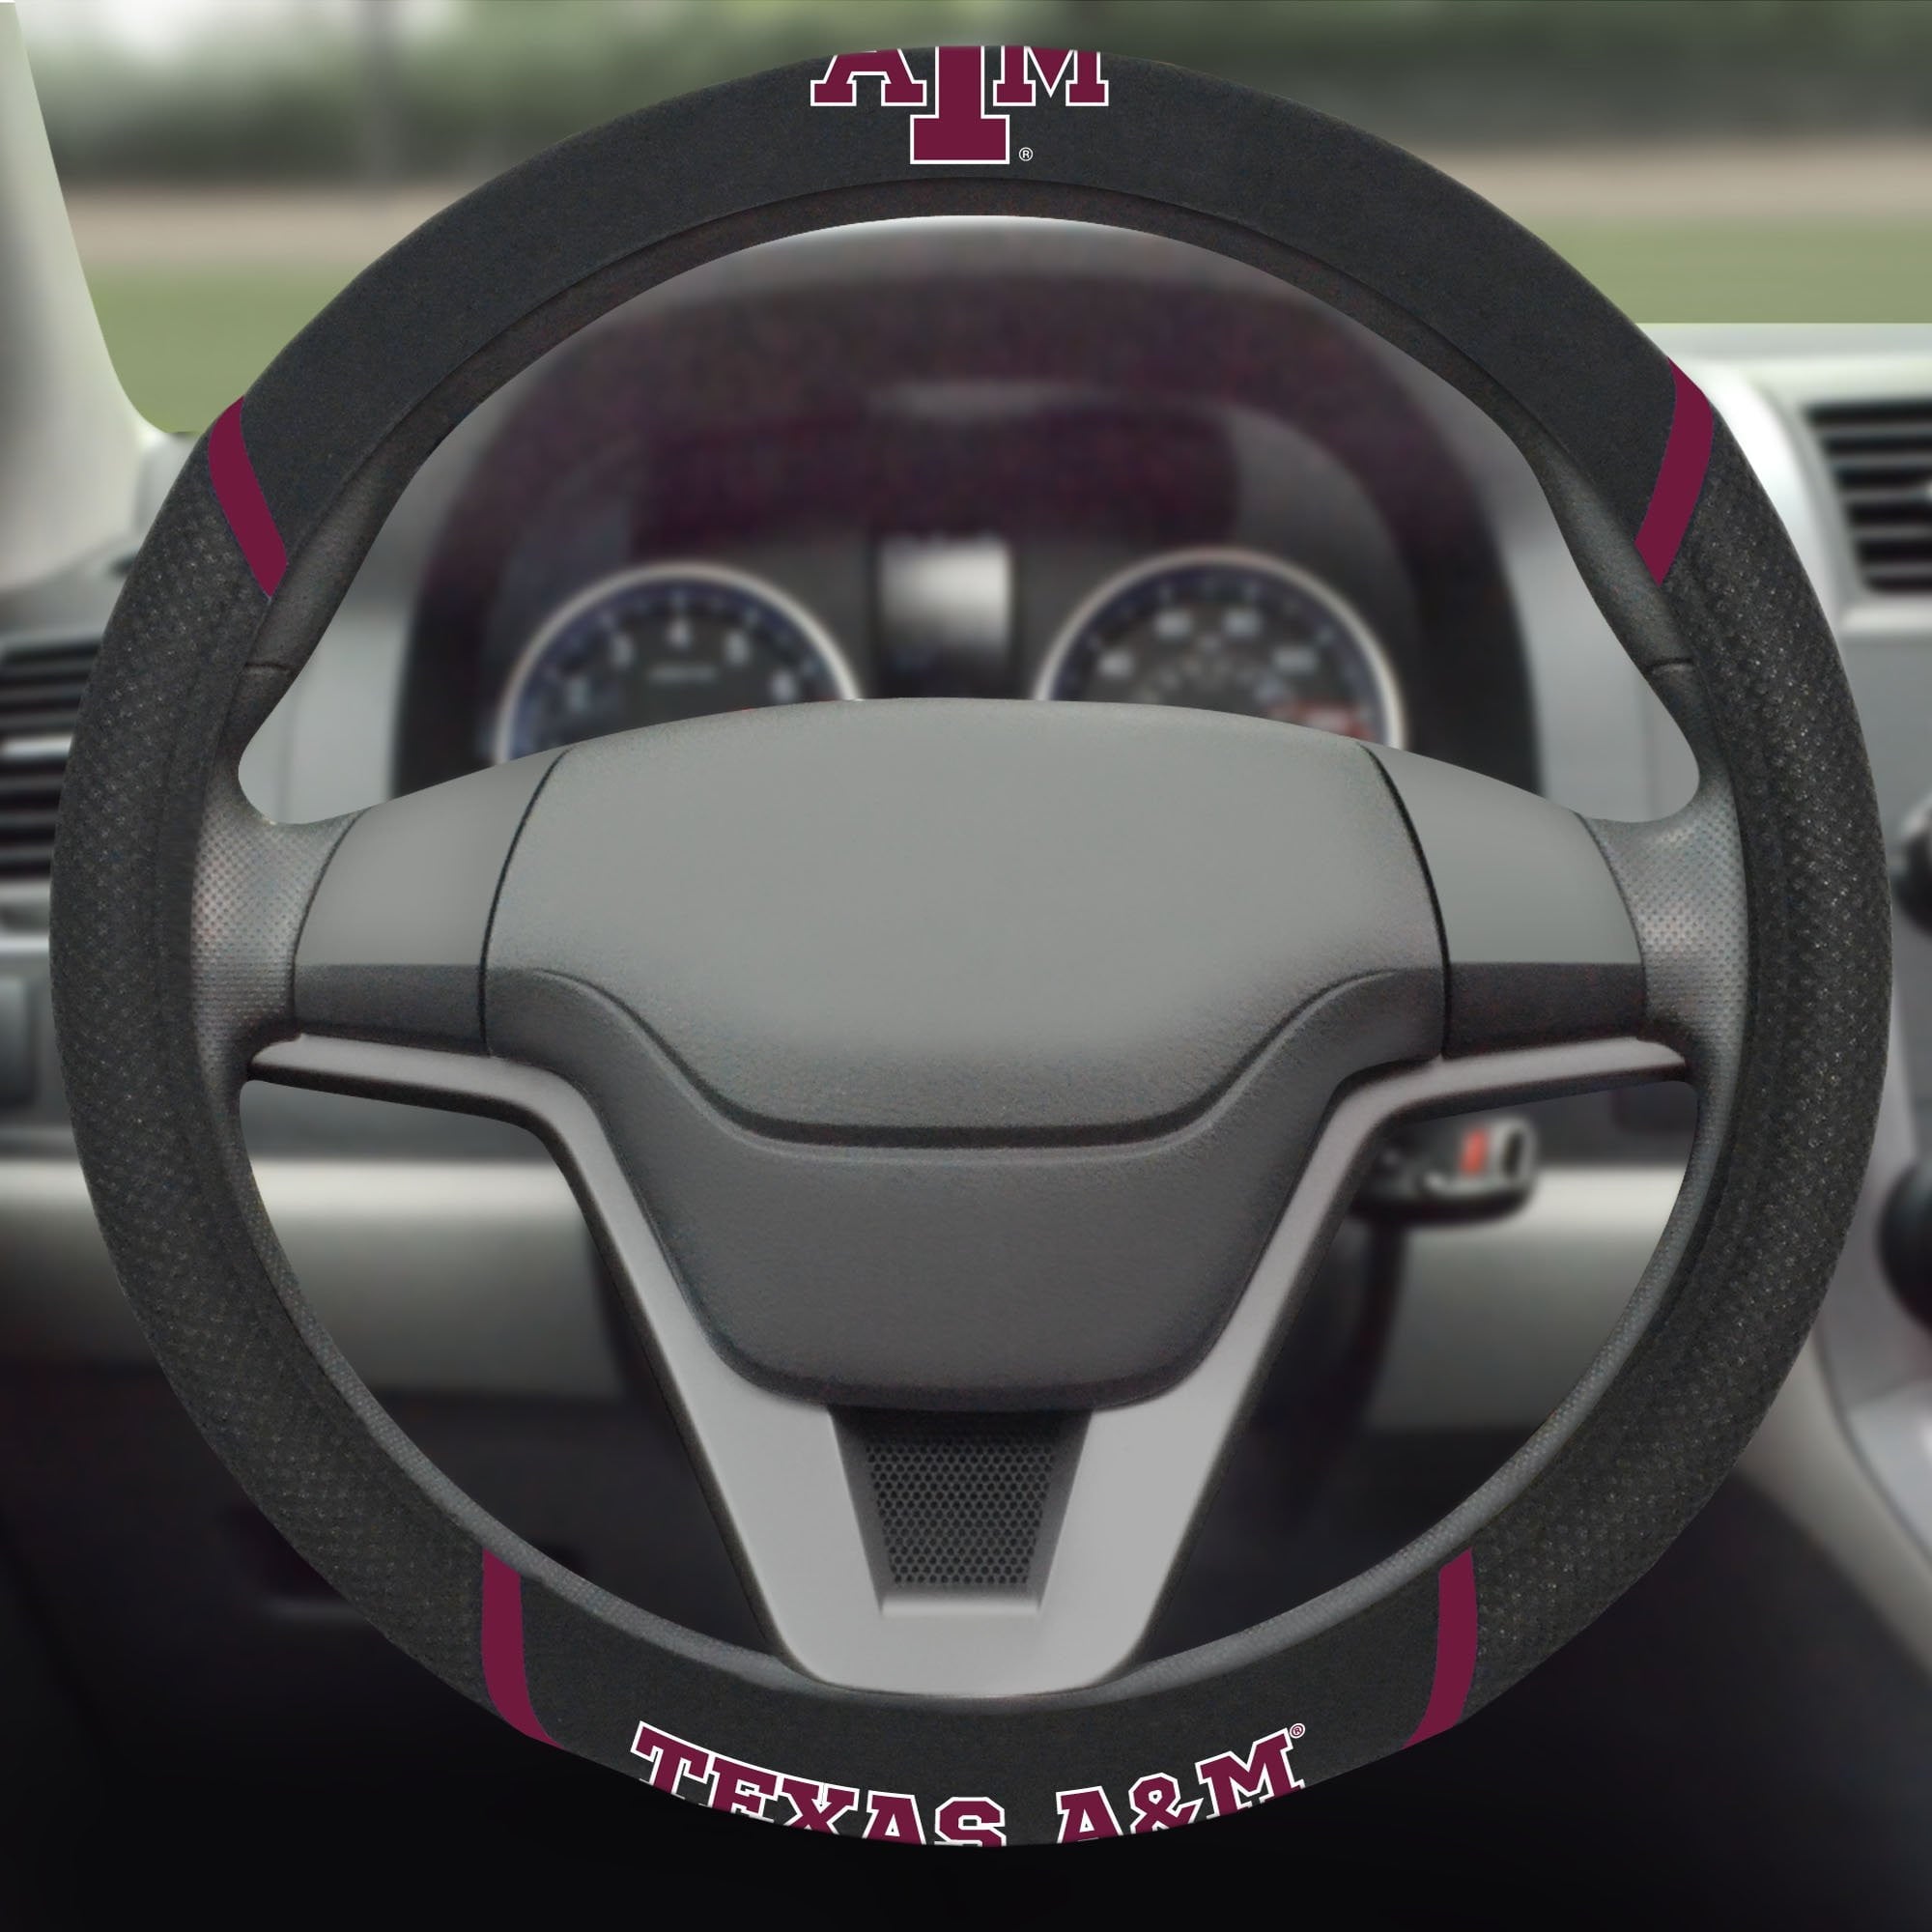 Texas A&M Steering Wheel Cover 15